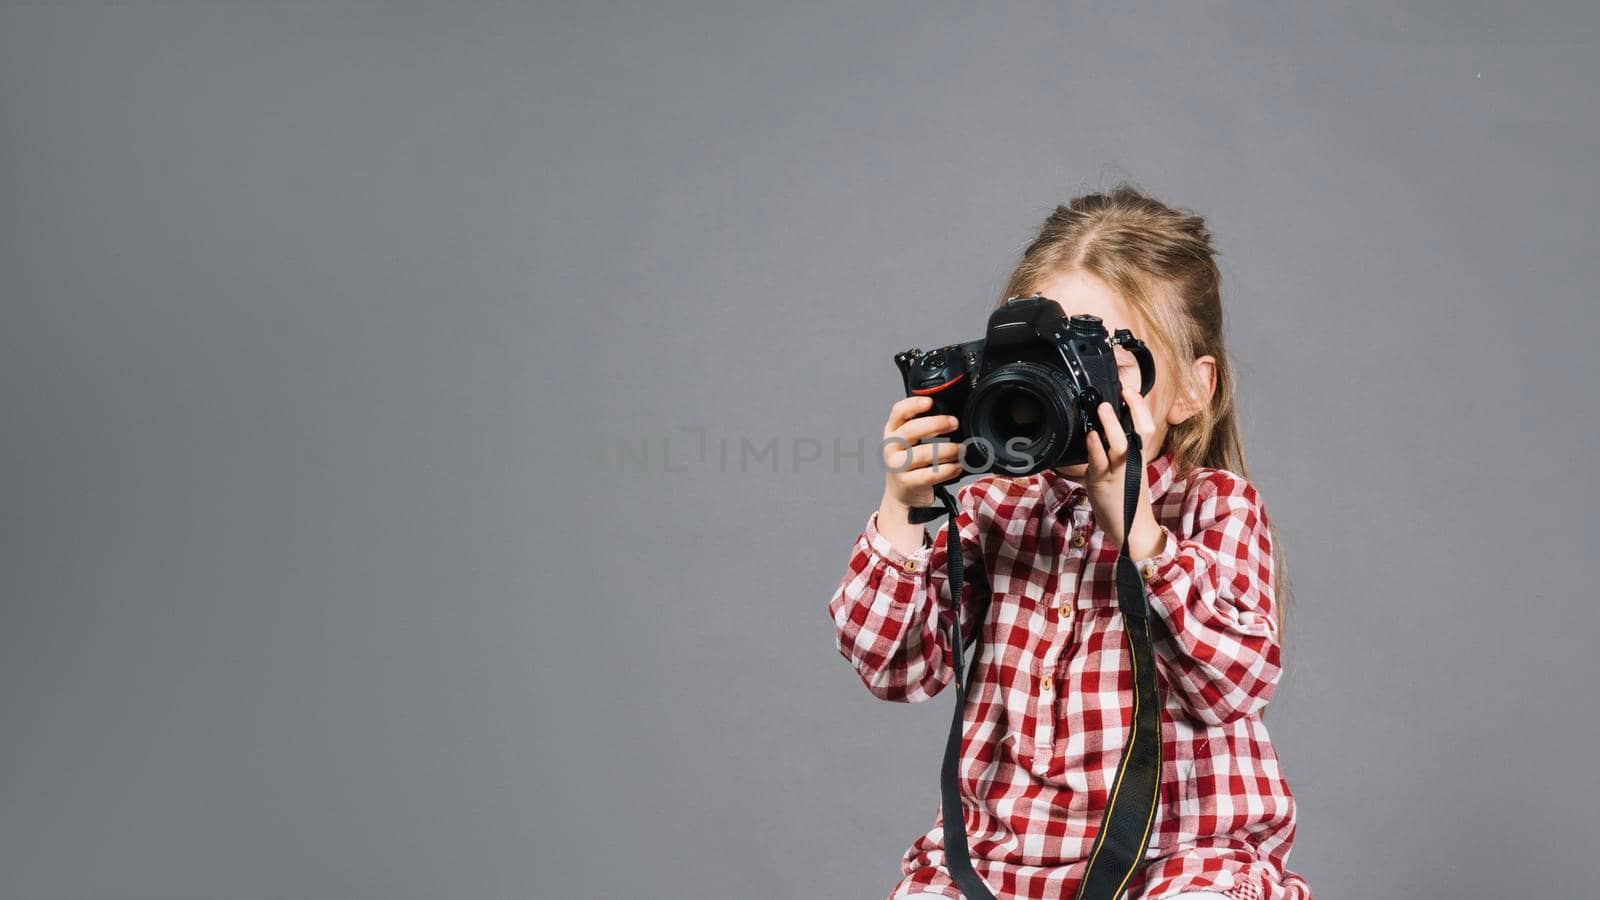 close up girl holding camera front her face standing against gray backdrop